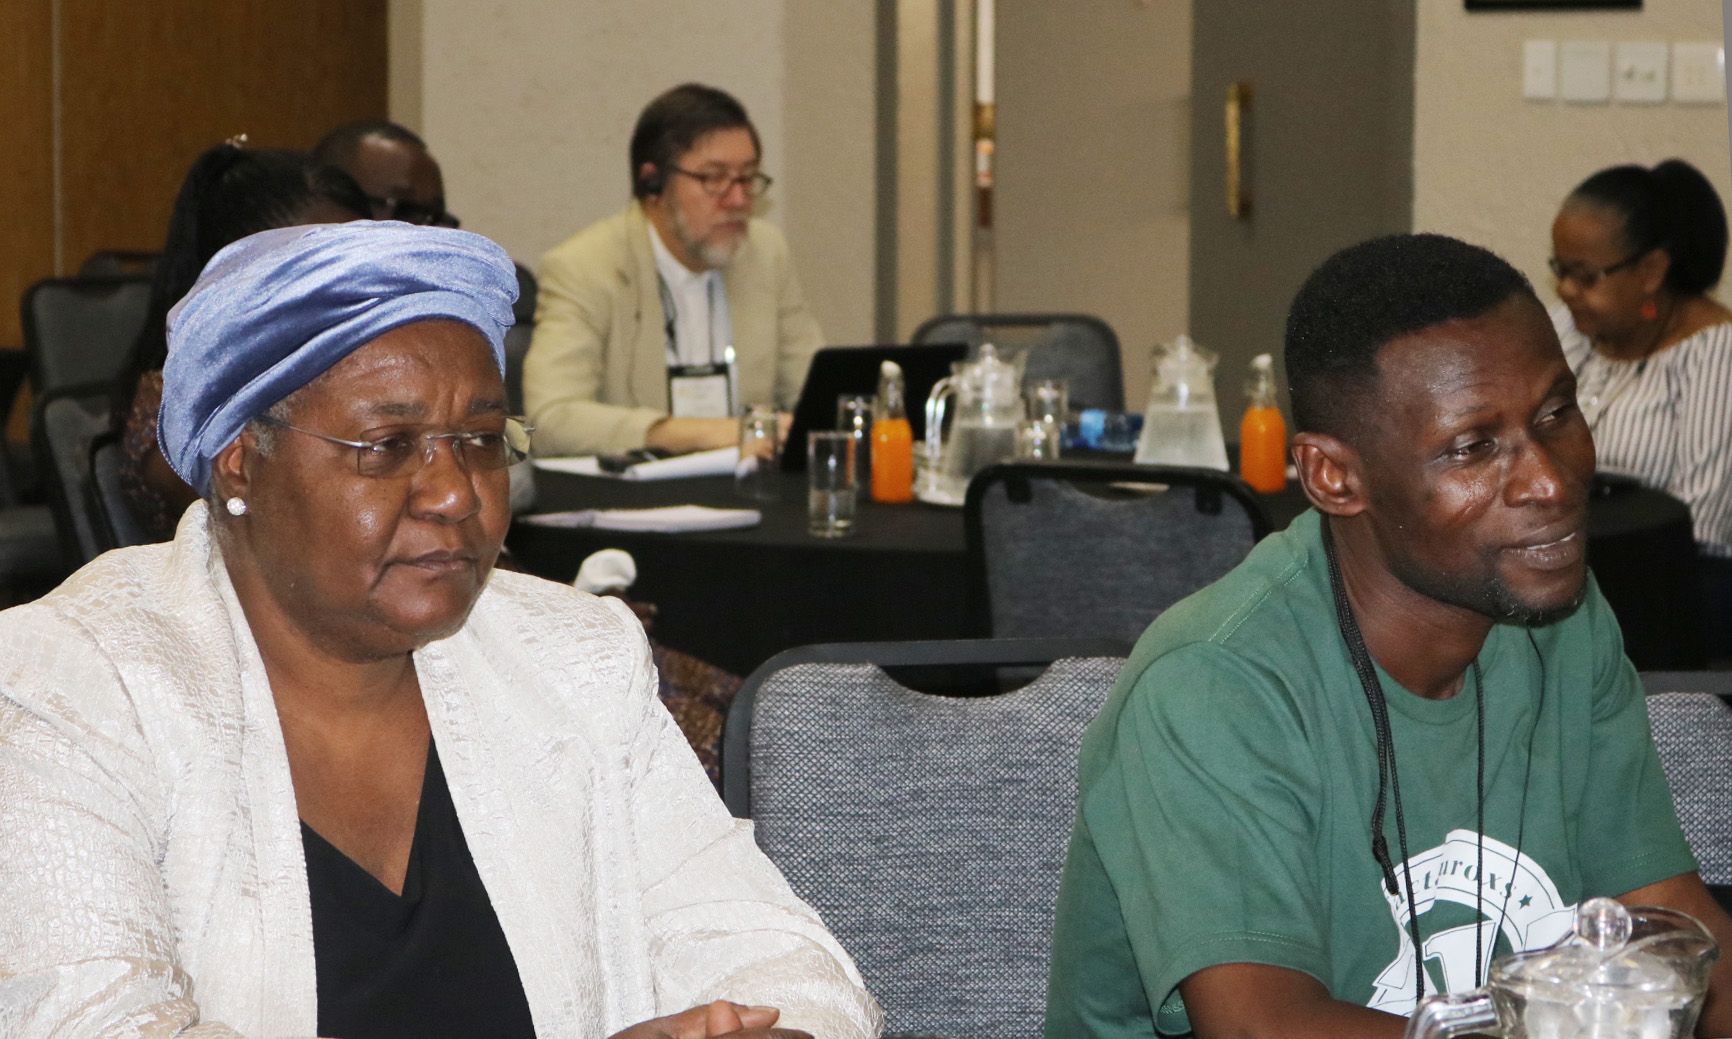 Bishop Joaquina F. Nhanala of Mozambique (left) and missionary Innocent P. Afful listen to The United Methodist Church’s plans for existing land in Africa during an agricultural summit held Jan. 13-16, 2019, in Johannesburg. Afful died April 17 at age 49. File photo by Eveline Chikwanah, UM News.